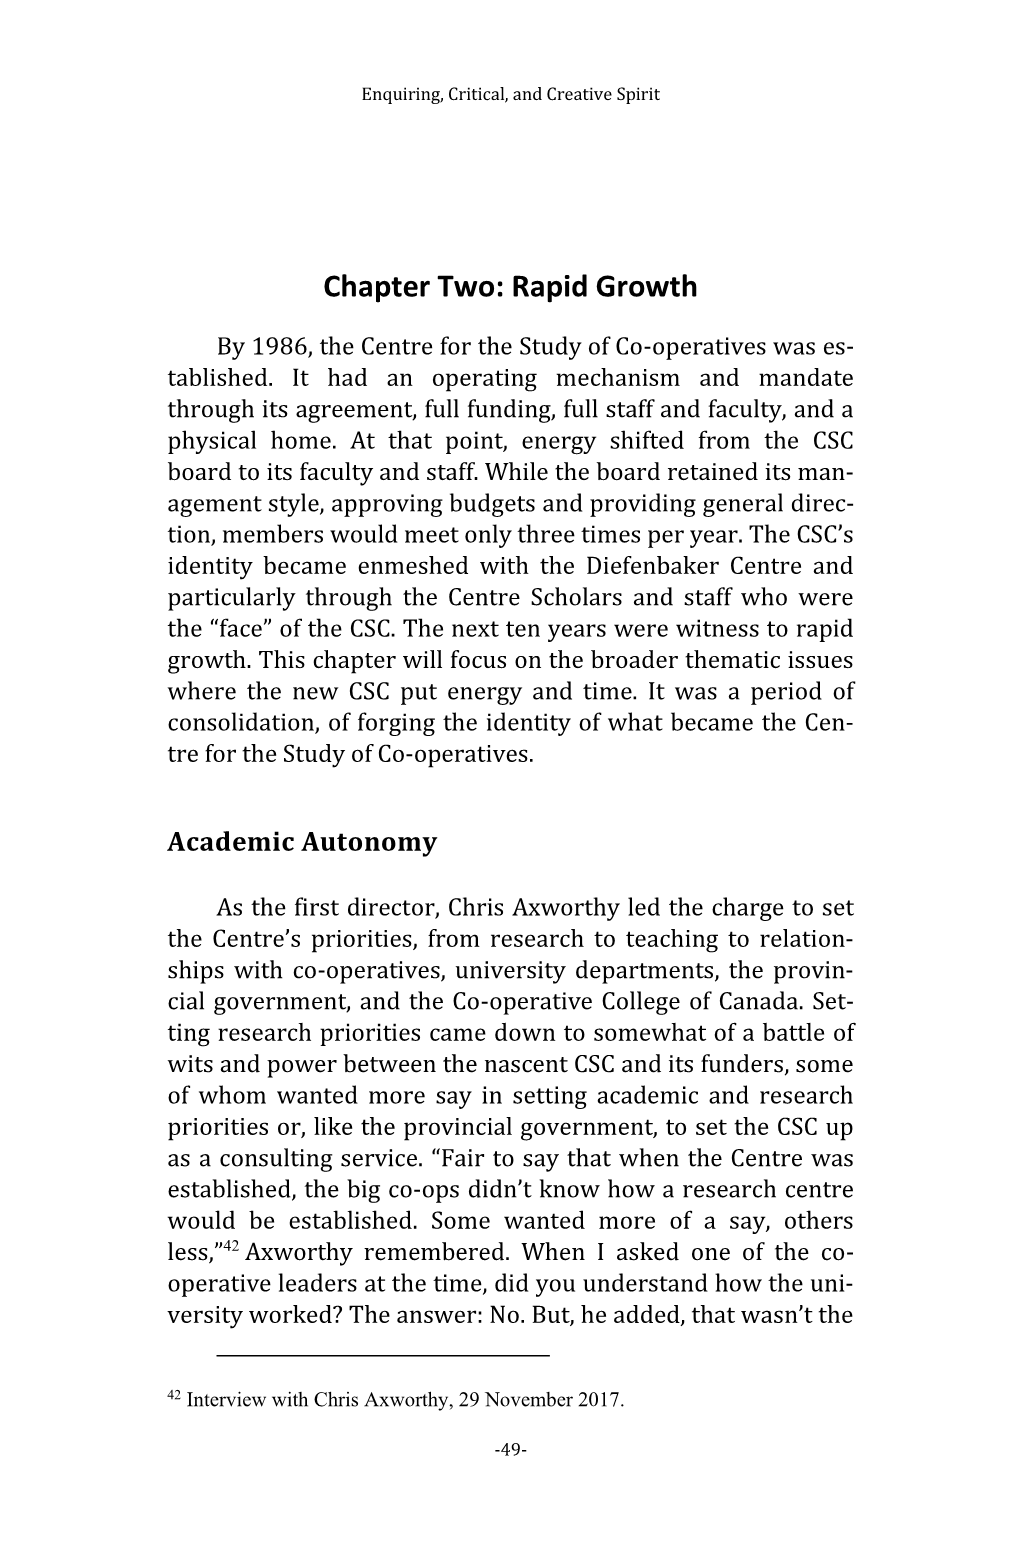 Chapter Two: Rapid Growth